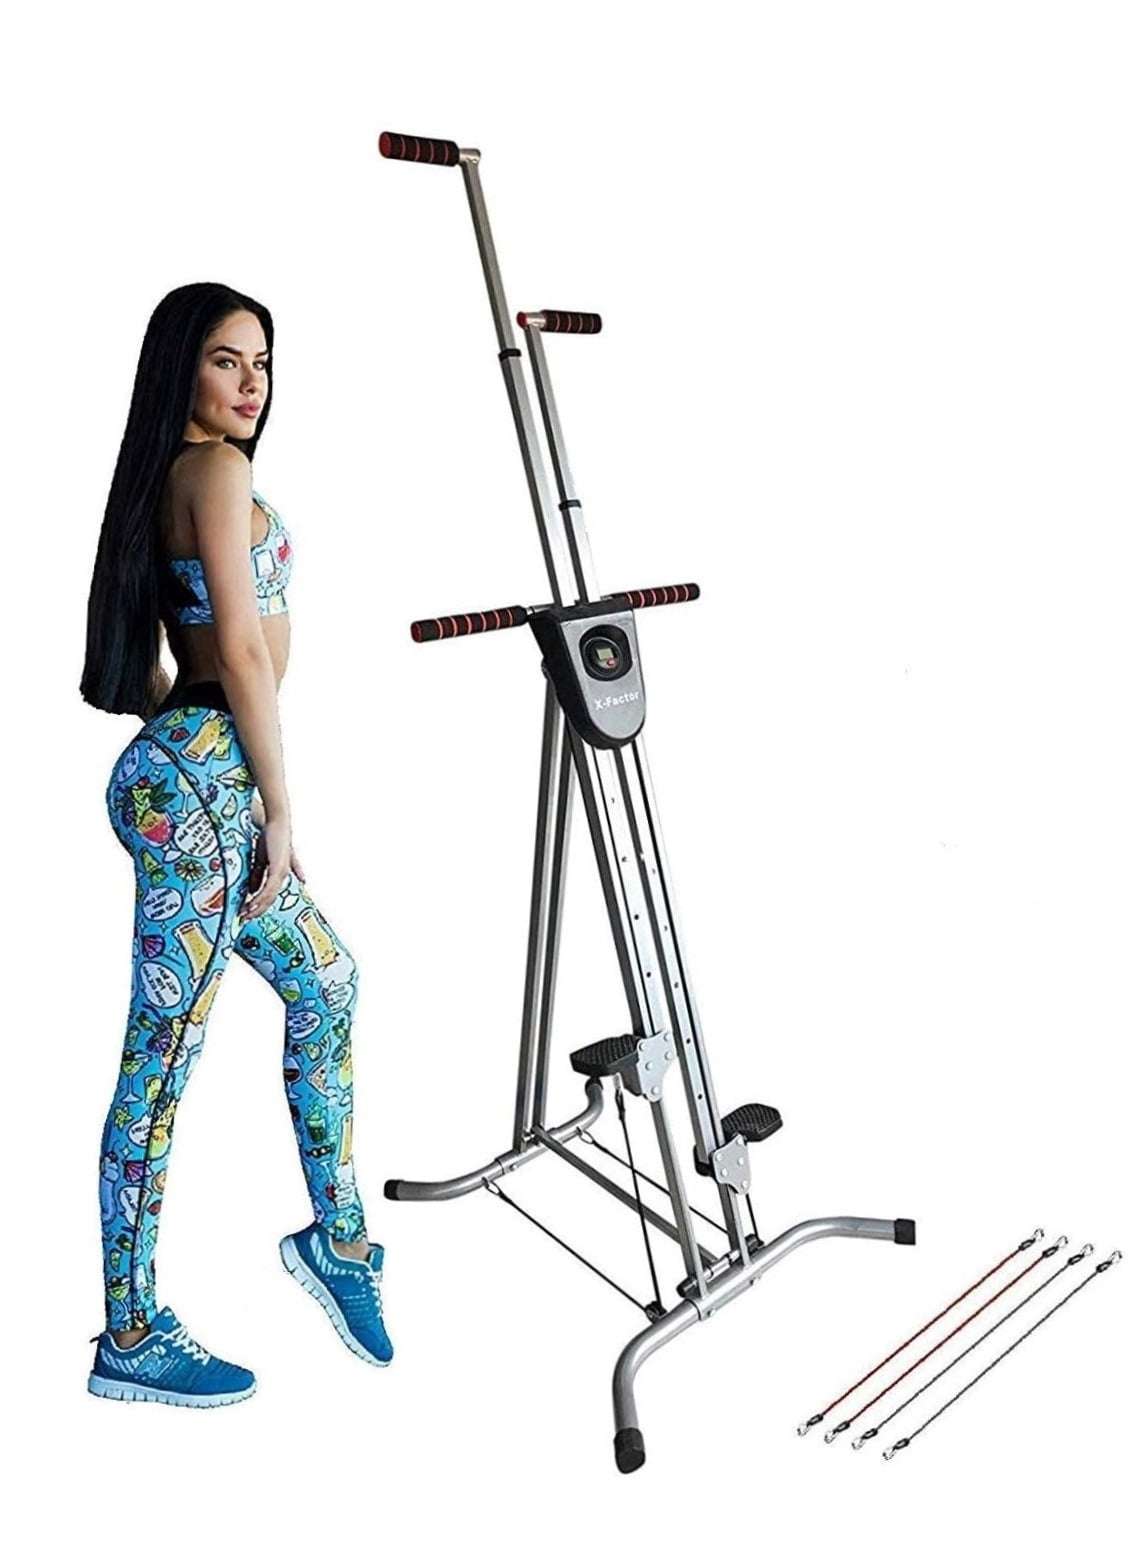 XR Vertical Maxi Climber W/ 3 Smooth Levels Abs Cardio Resistance Cords Function 